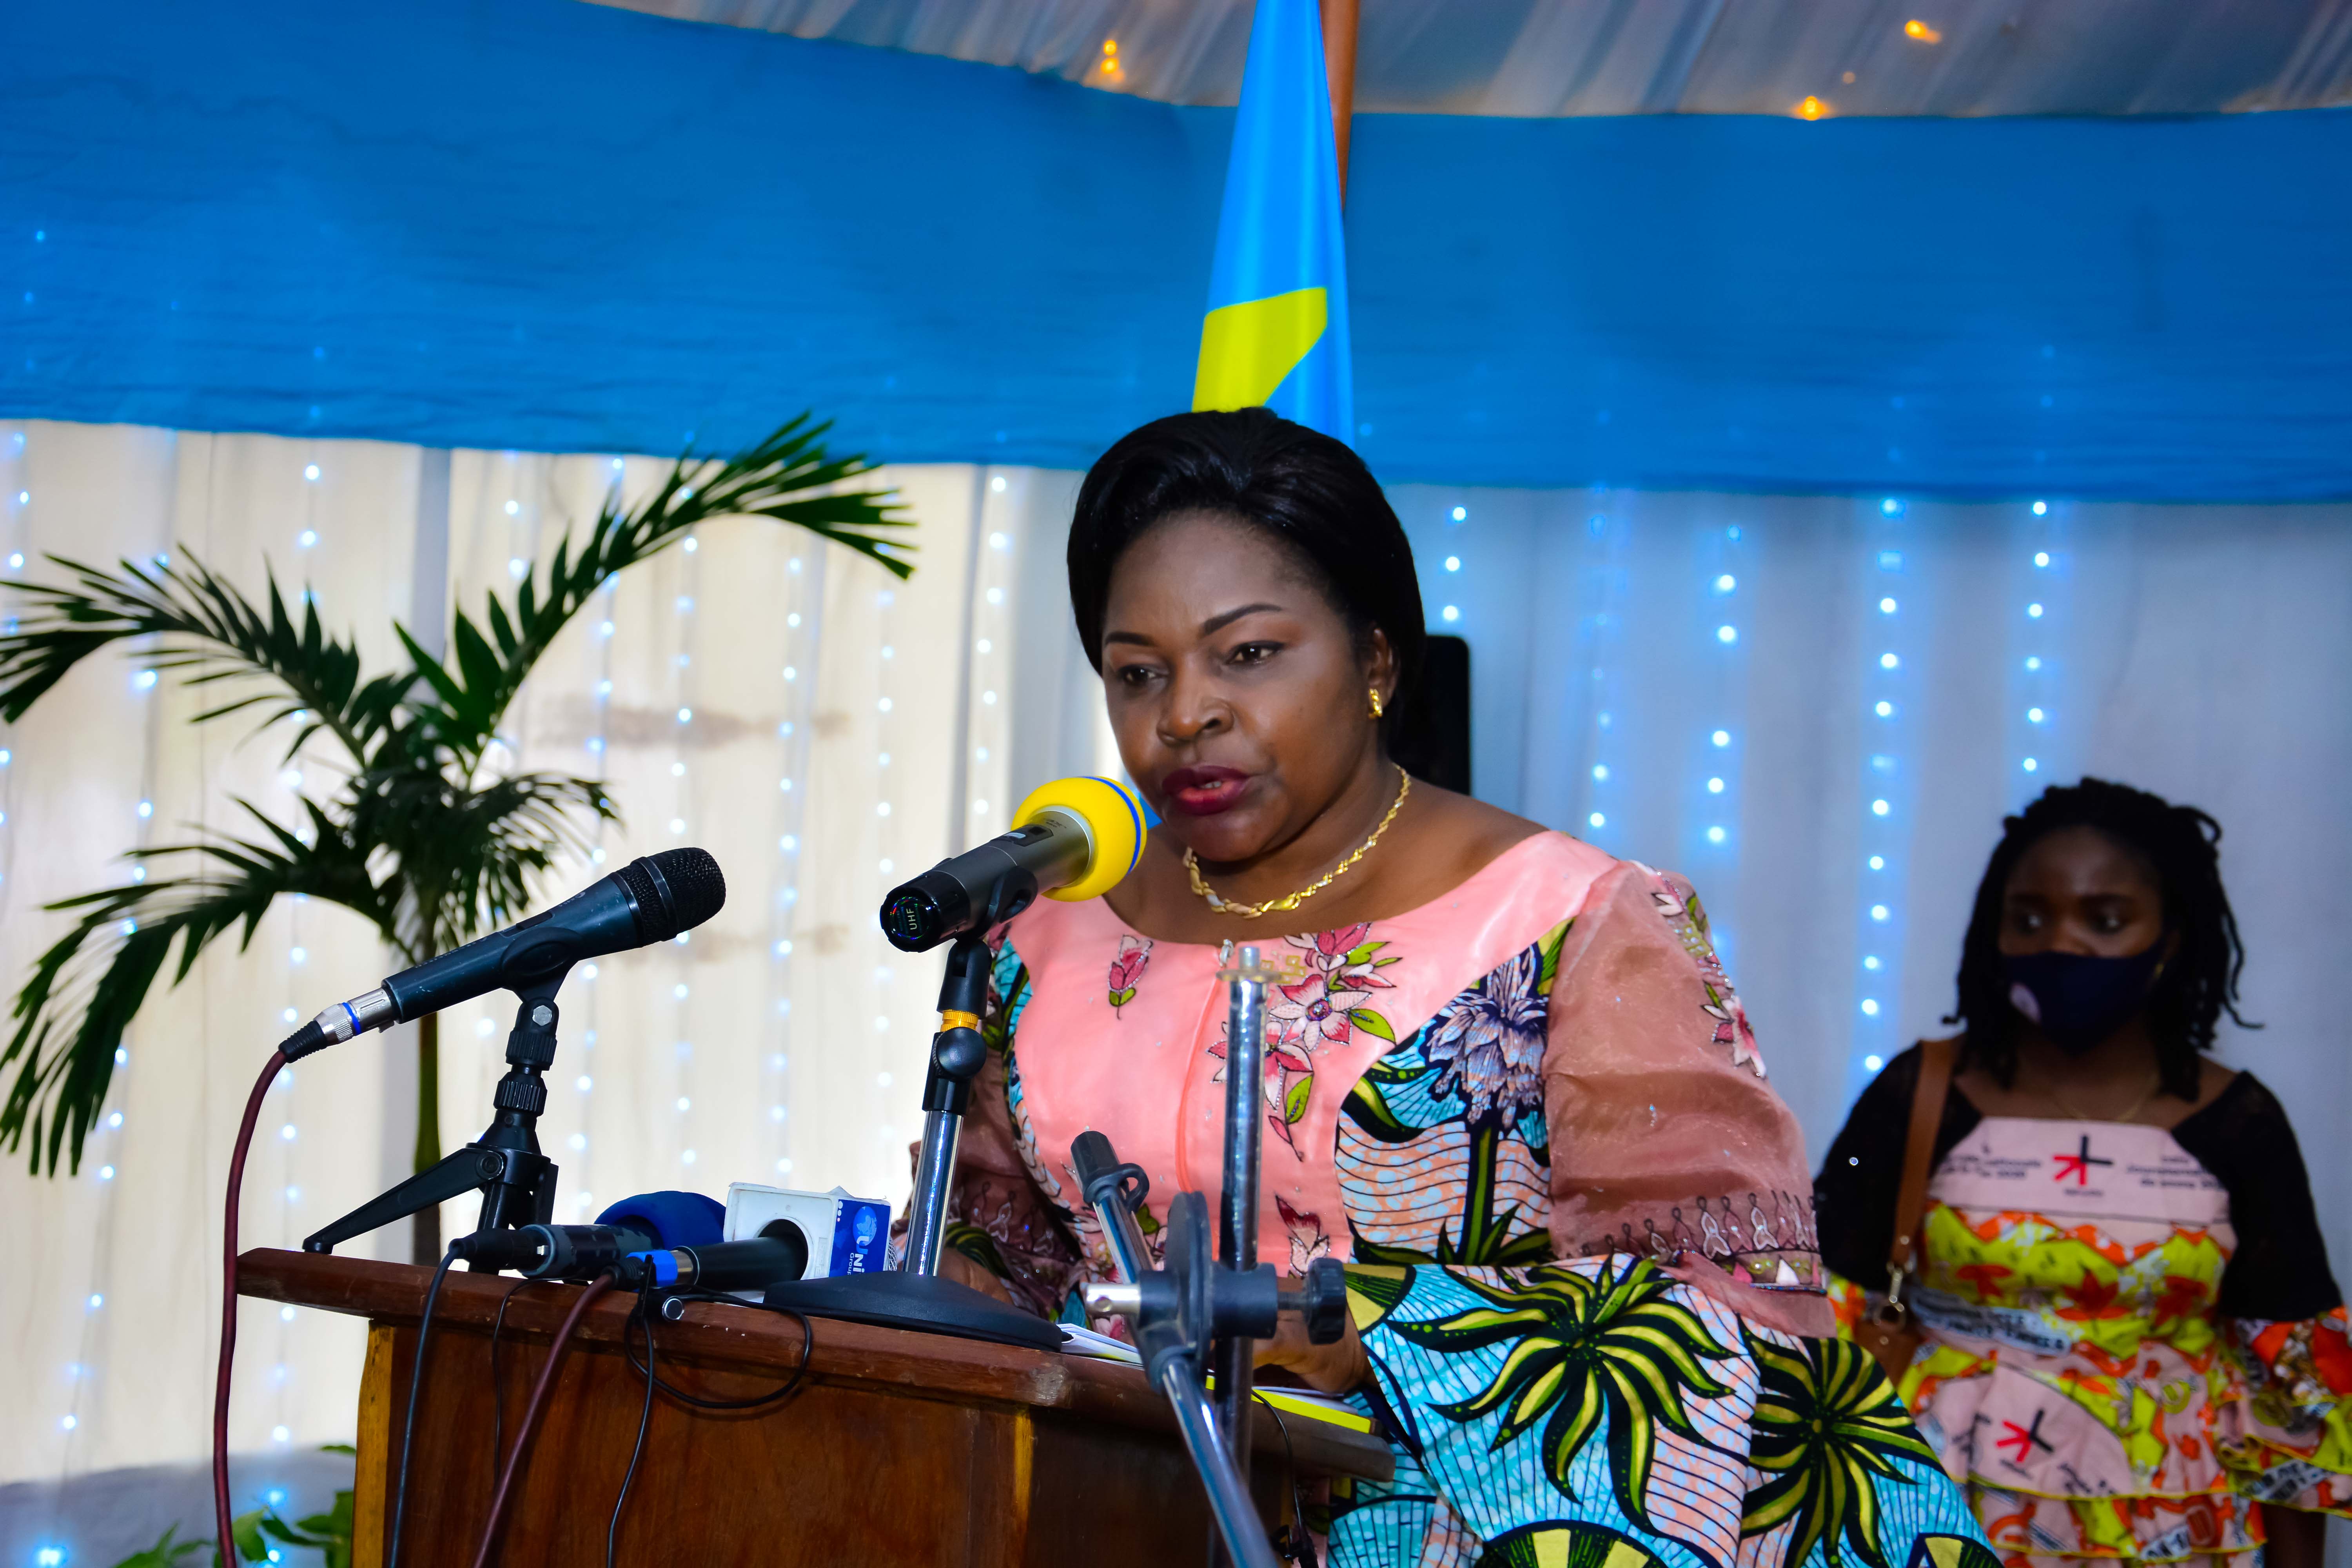 Excellency Mrs. Béatrice Lomeya, Minister of Gender, Family and Children, DRC